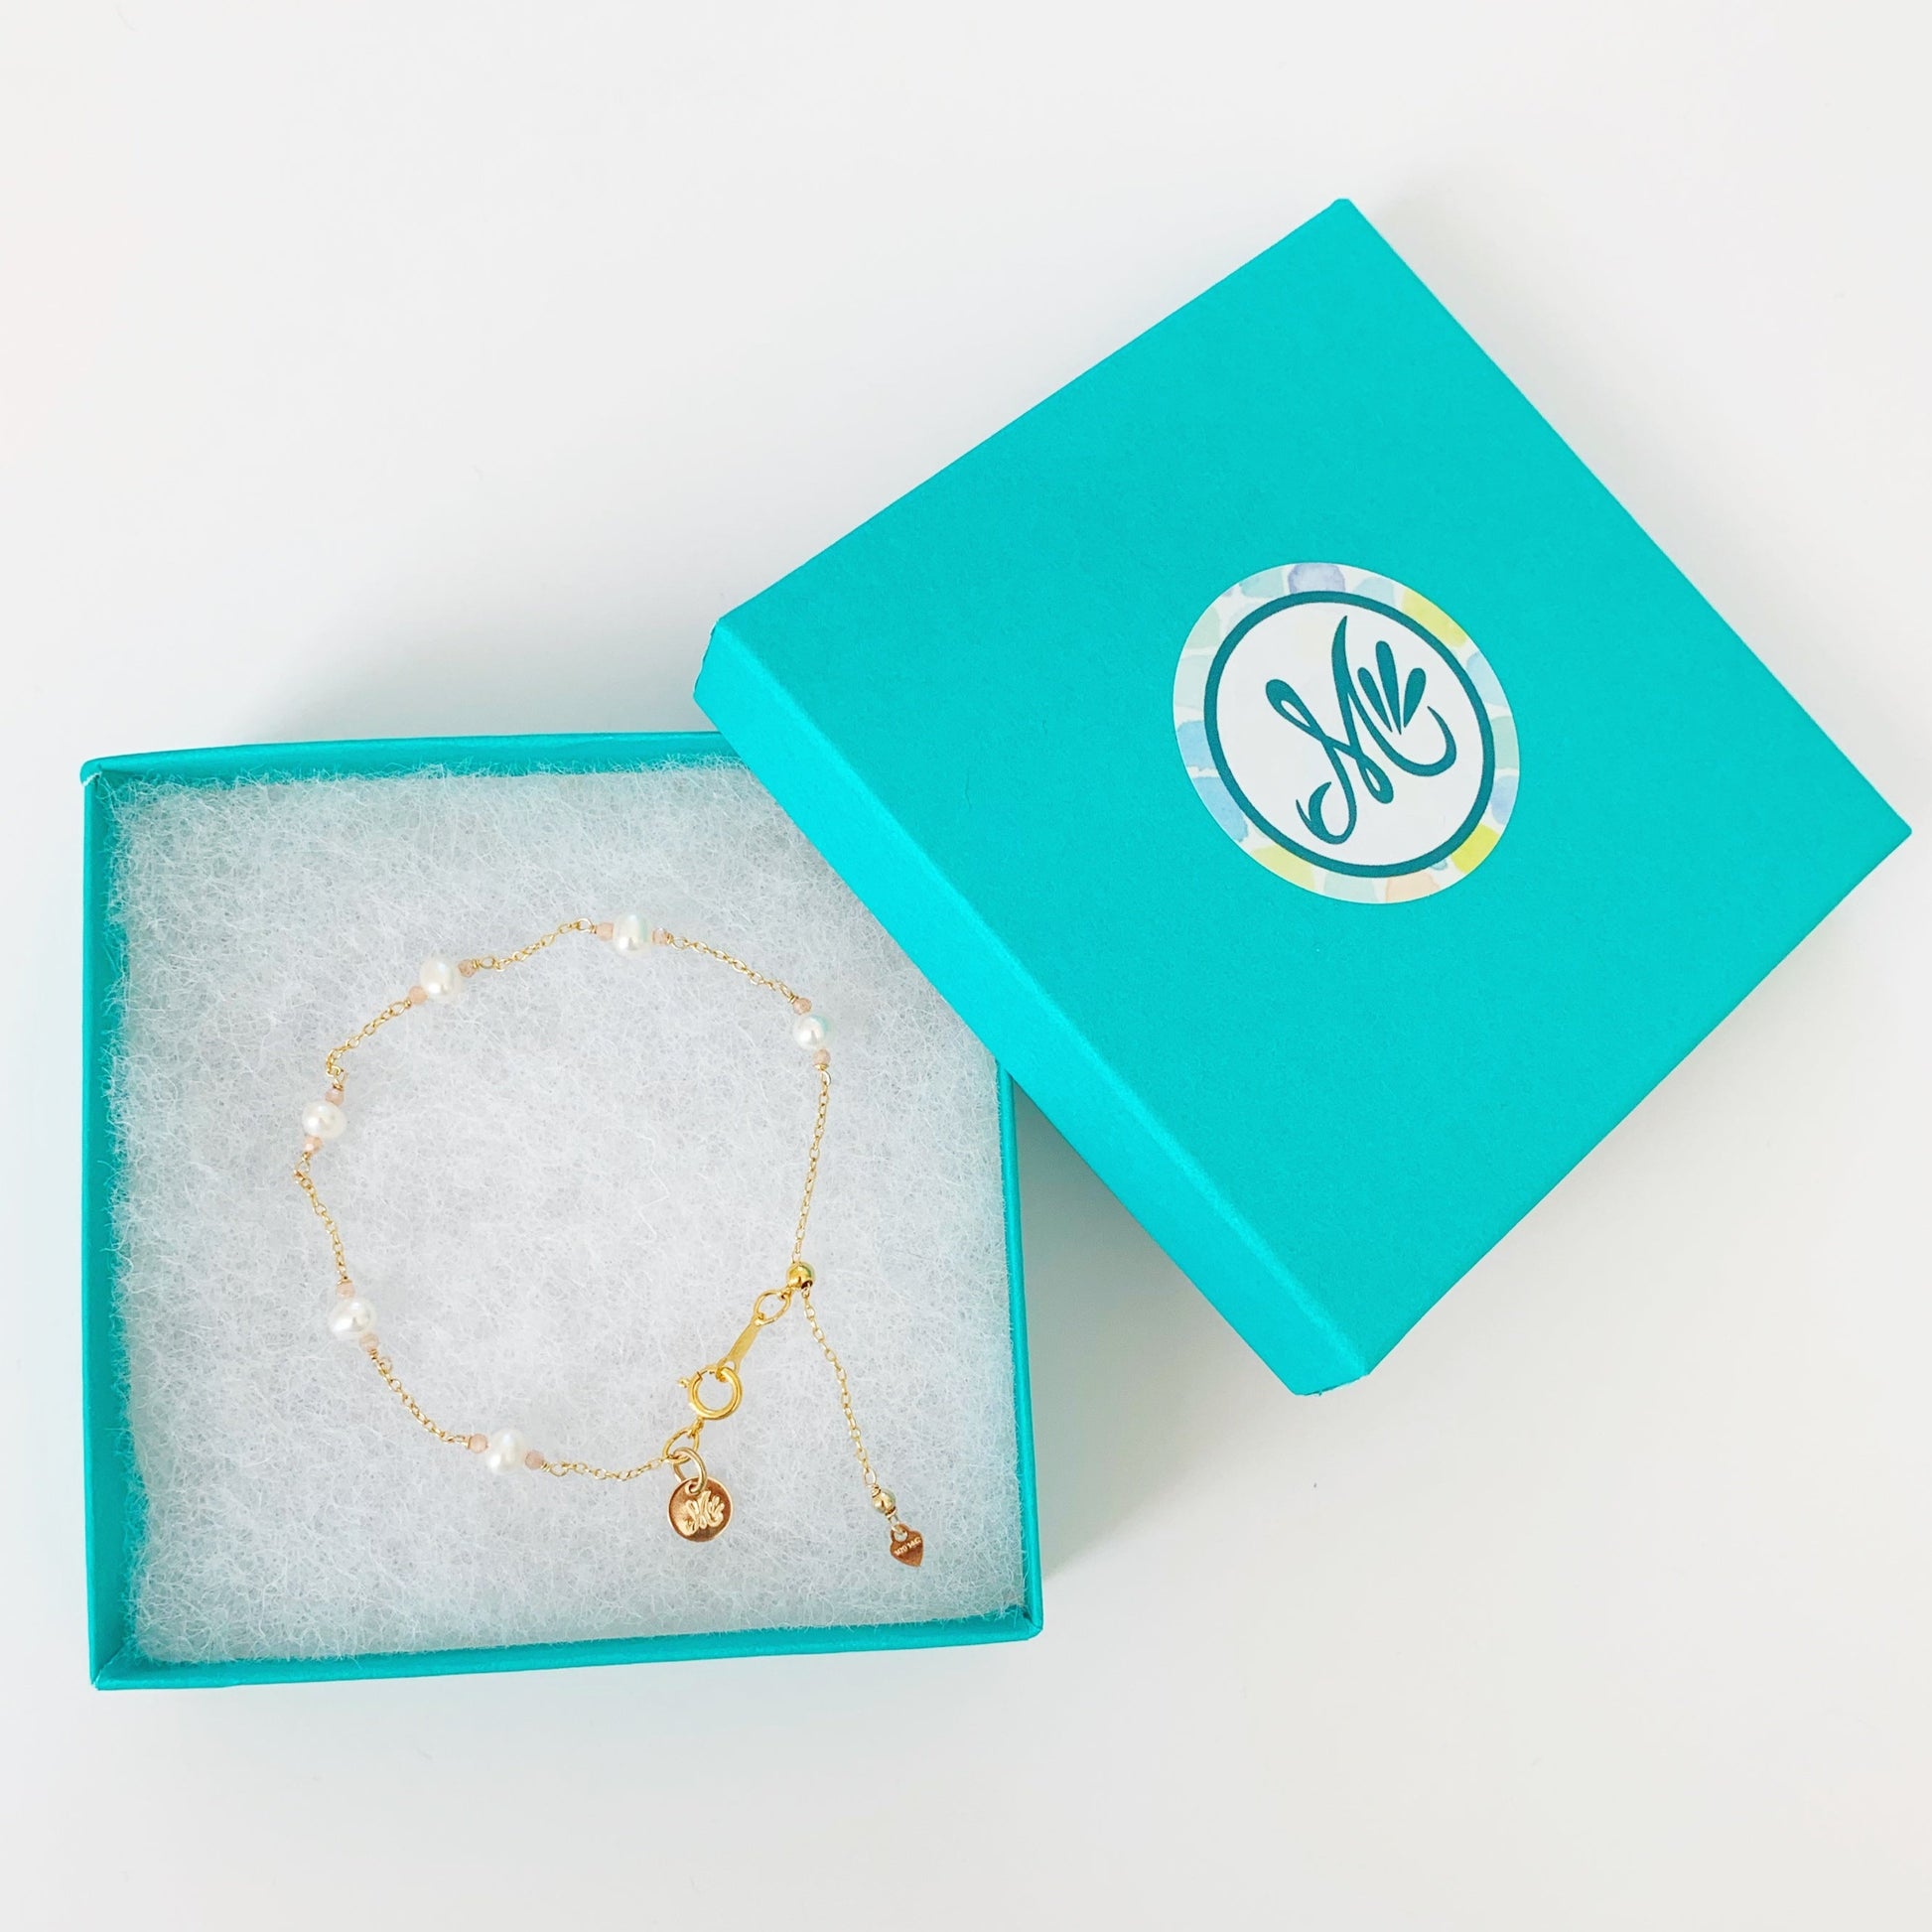 Barrington bracelet pictured in a teal gift box on a white surface